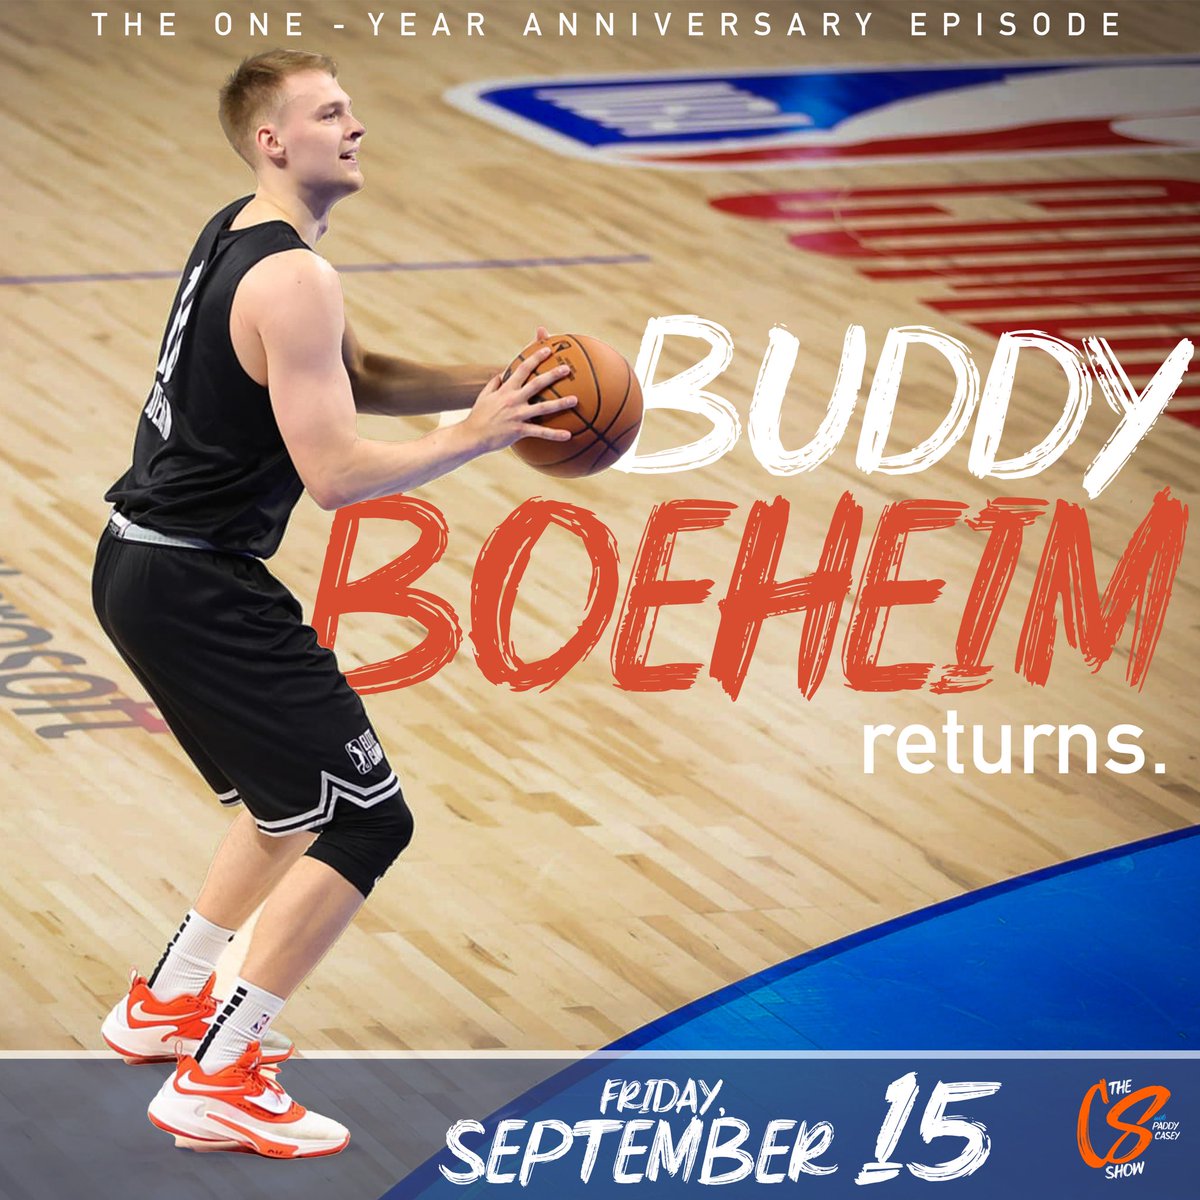 Newly assigned Detroit Correspondent BUDDY BOEHEIM is back tomorrow for some catch-up talk and Cuse Basketball Trivia Challenge. We celebrate 1 year of the Swider Show. Don’t miss it!!